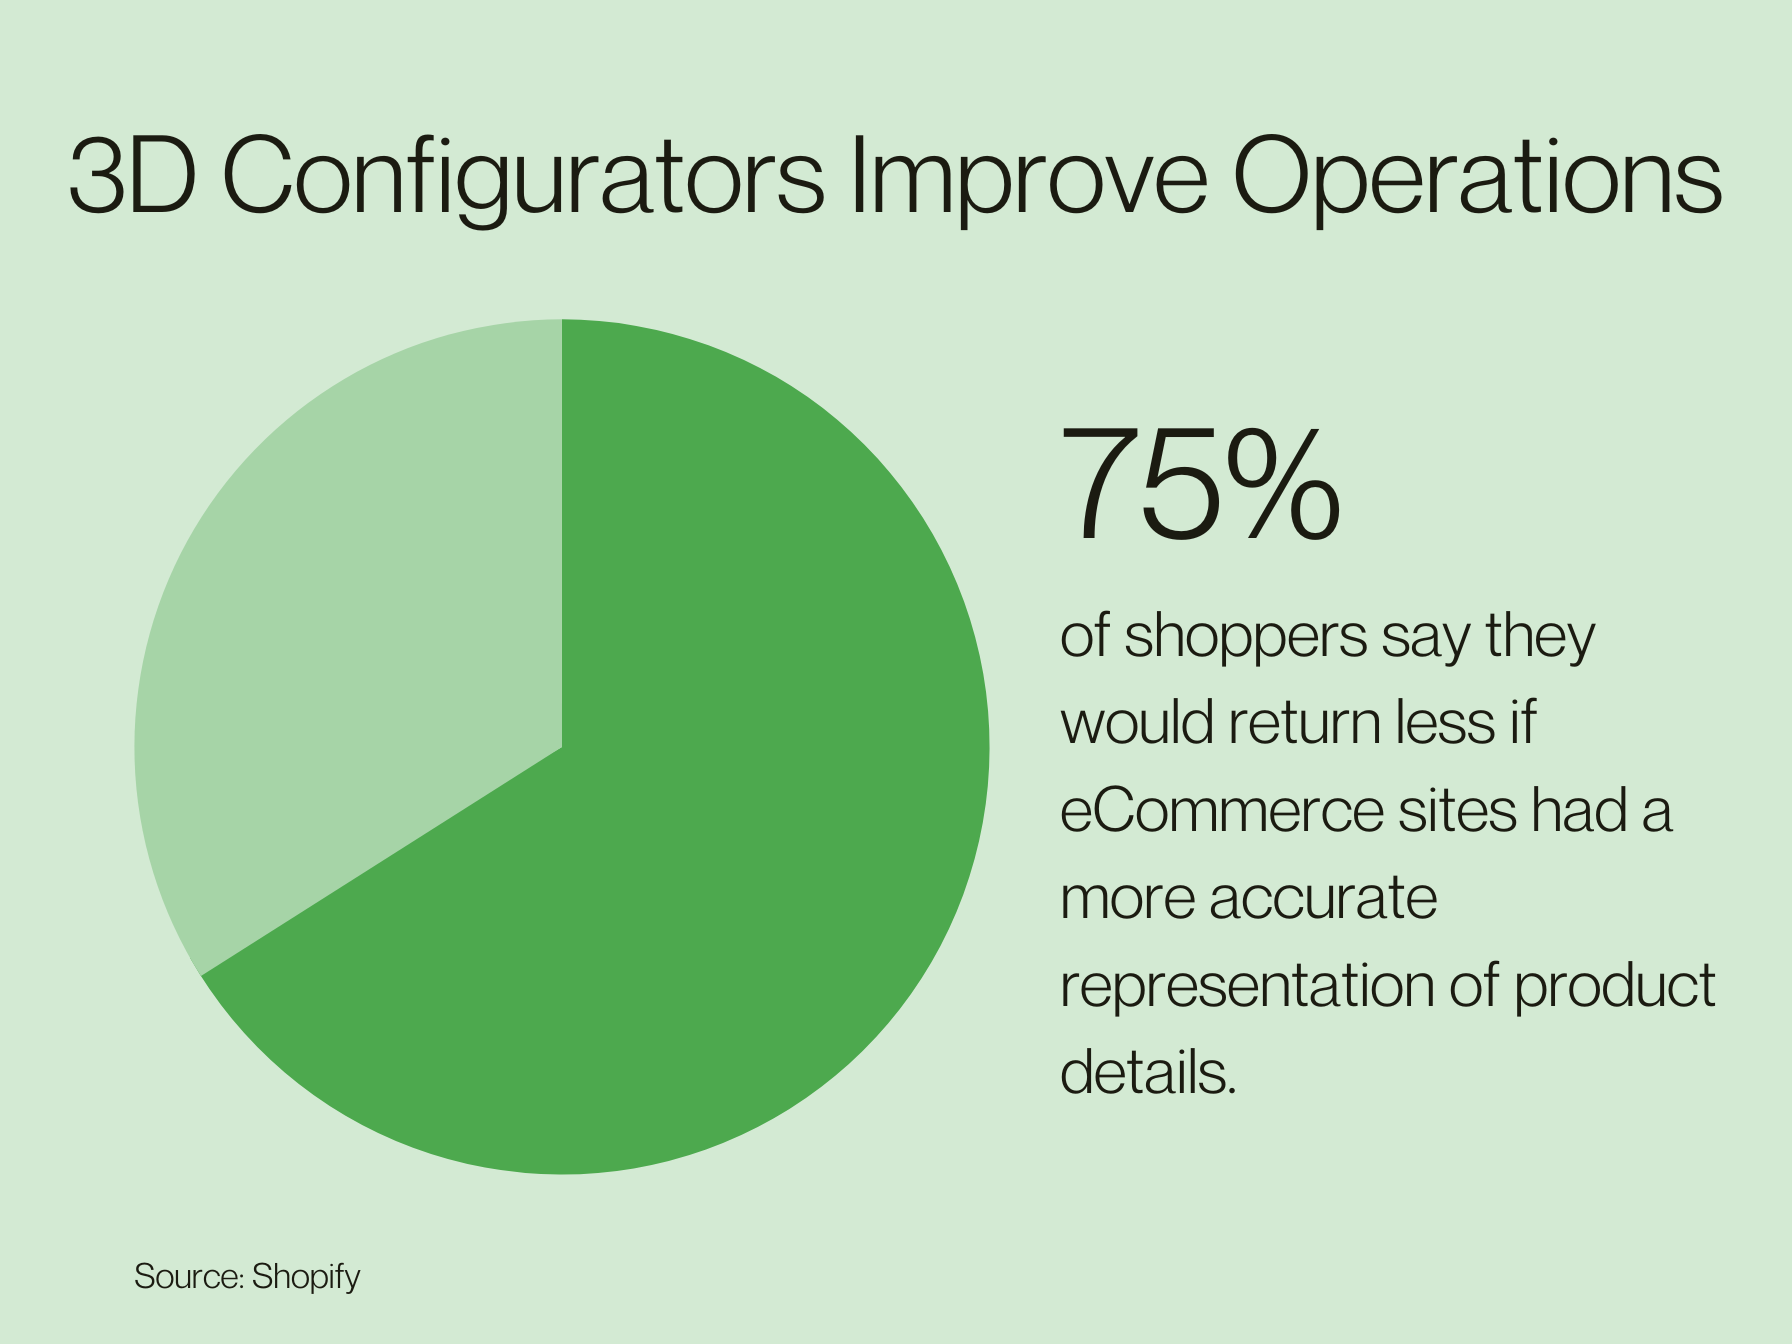 75 percent of shoppers say they would return less if eCommerce sites had a more accurate representation of product details